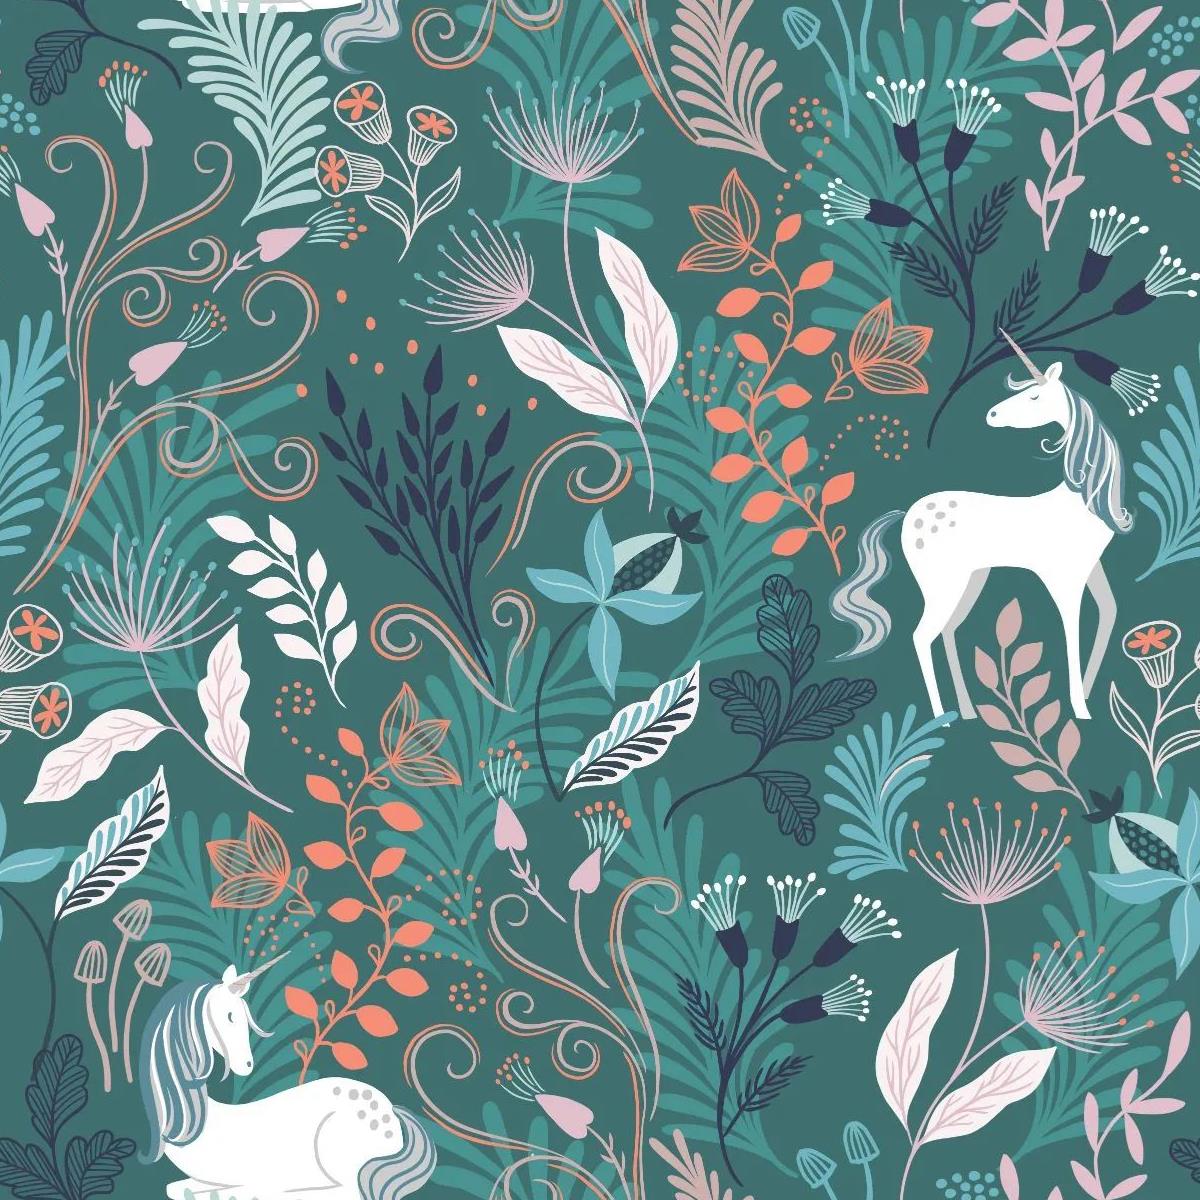 /images/product-images/2020images/FashionFabric/CraftCotton/LINov21/A543.3-Unicorns-on-teal-with-copper-metallic-01.jpg